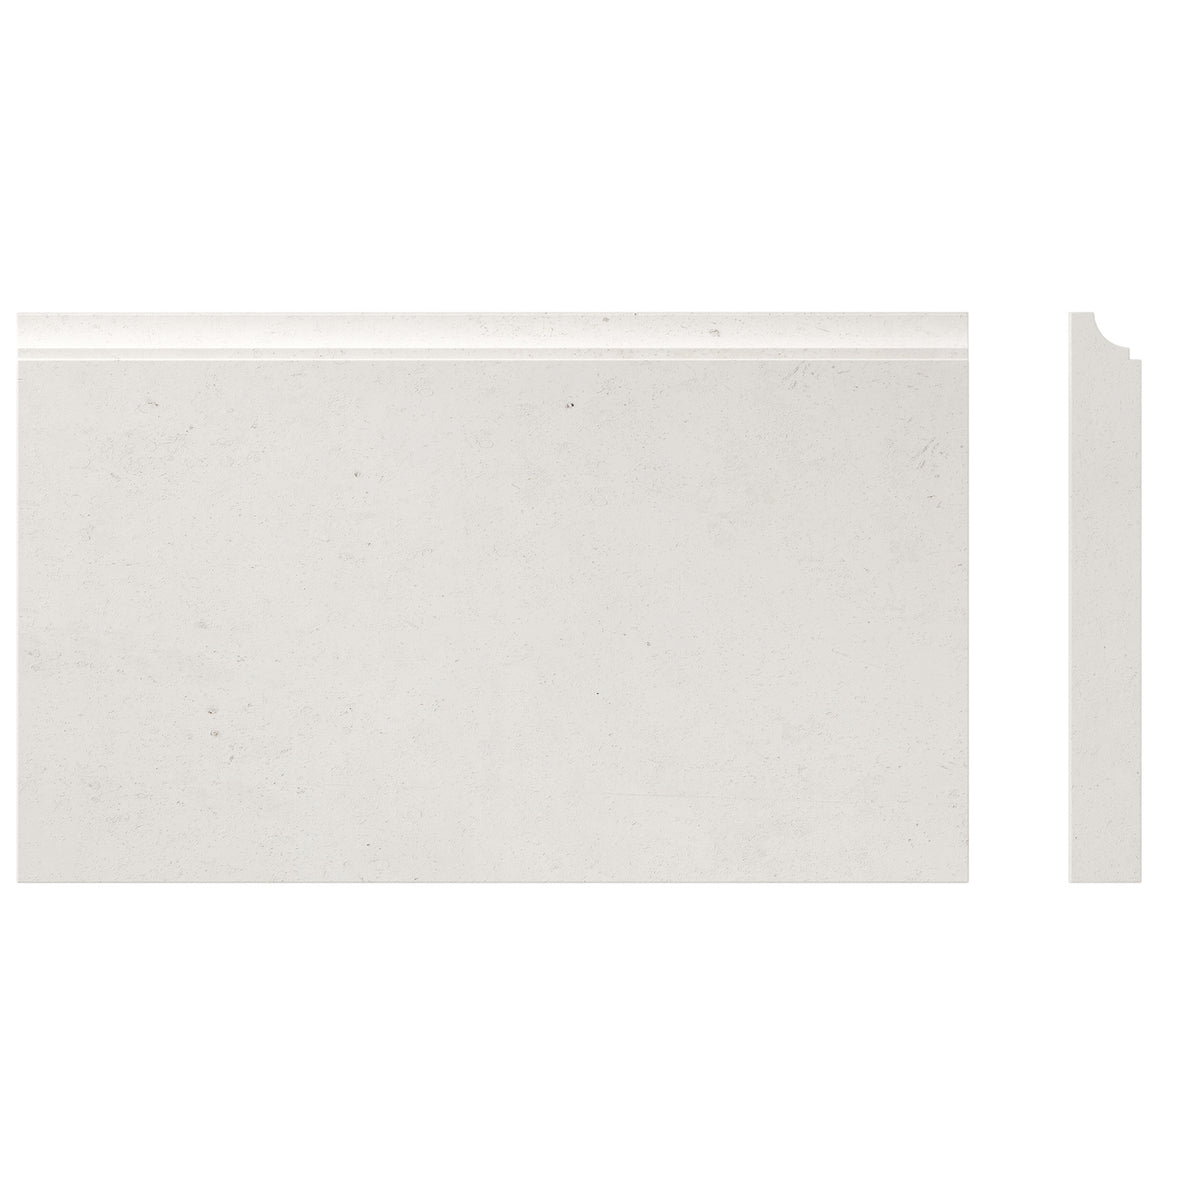 Heritage Family Base Moulding Main Product Slider View